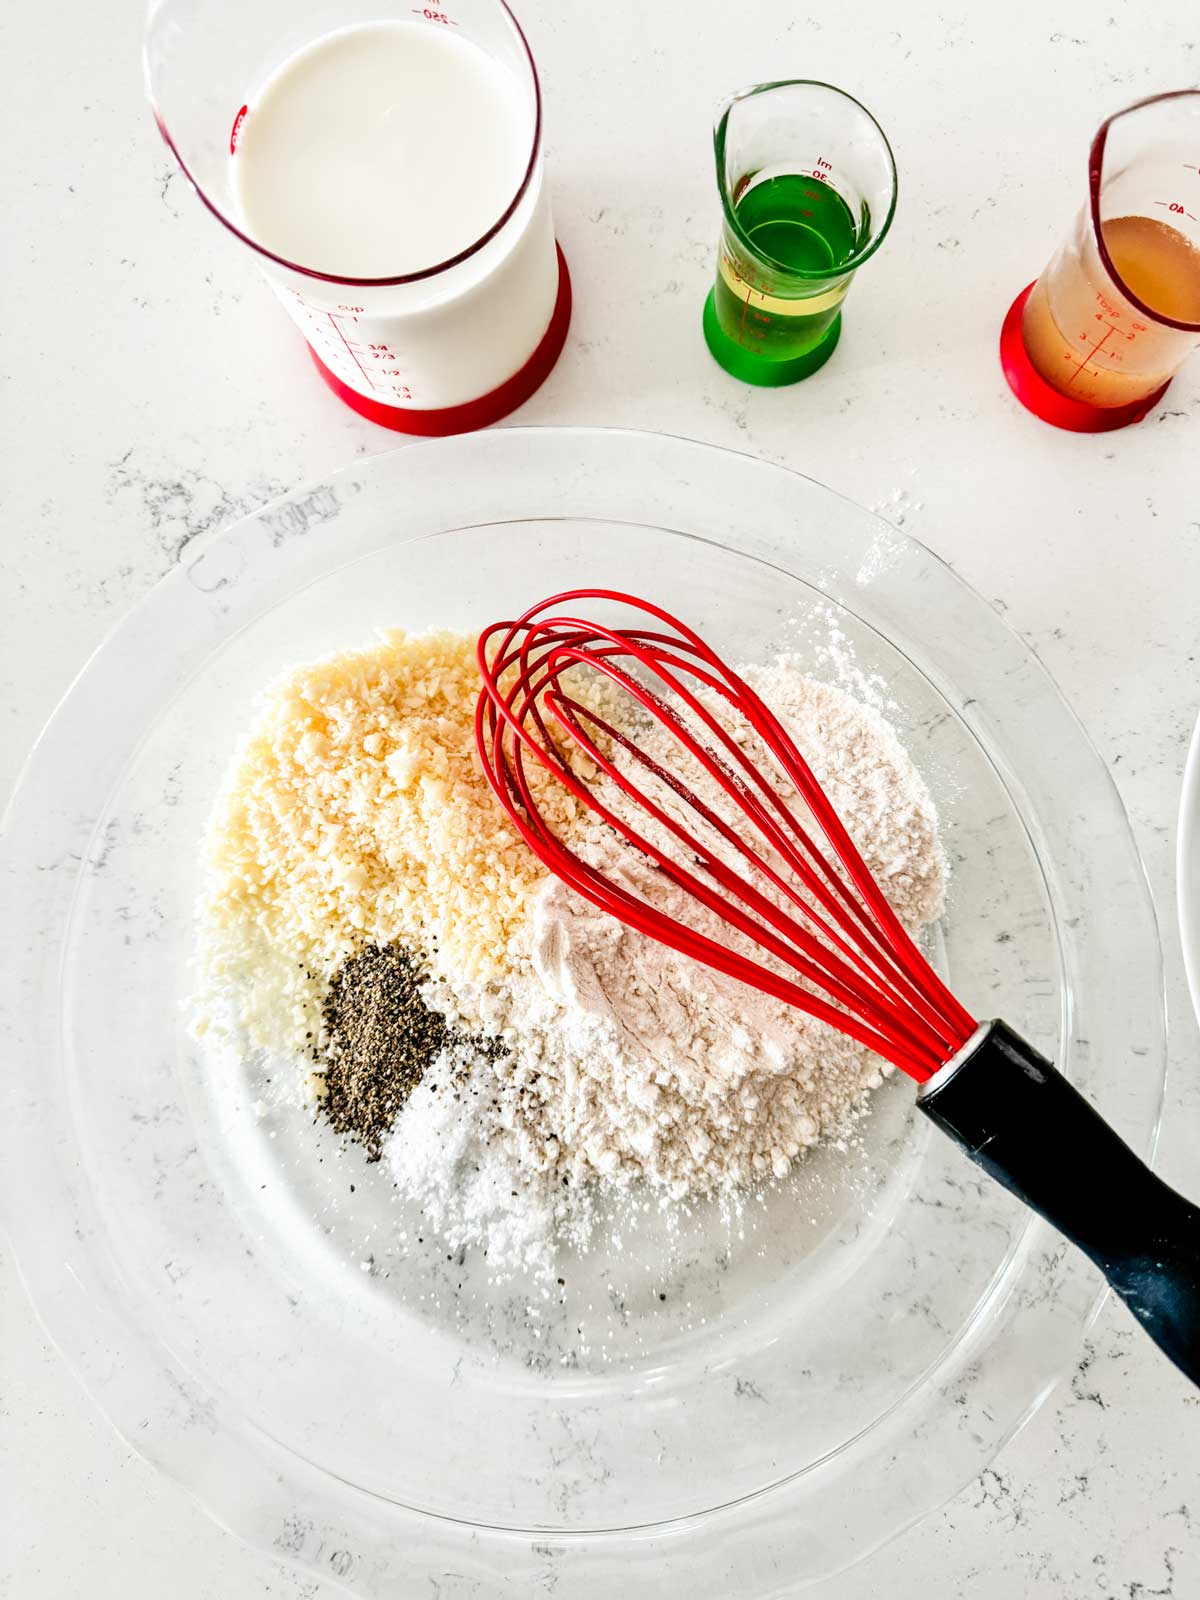 Flour parmesan, and seasonings being whisked together in a pie plate.